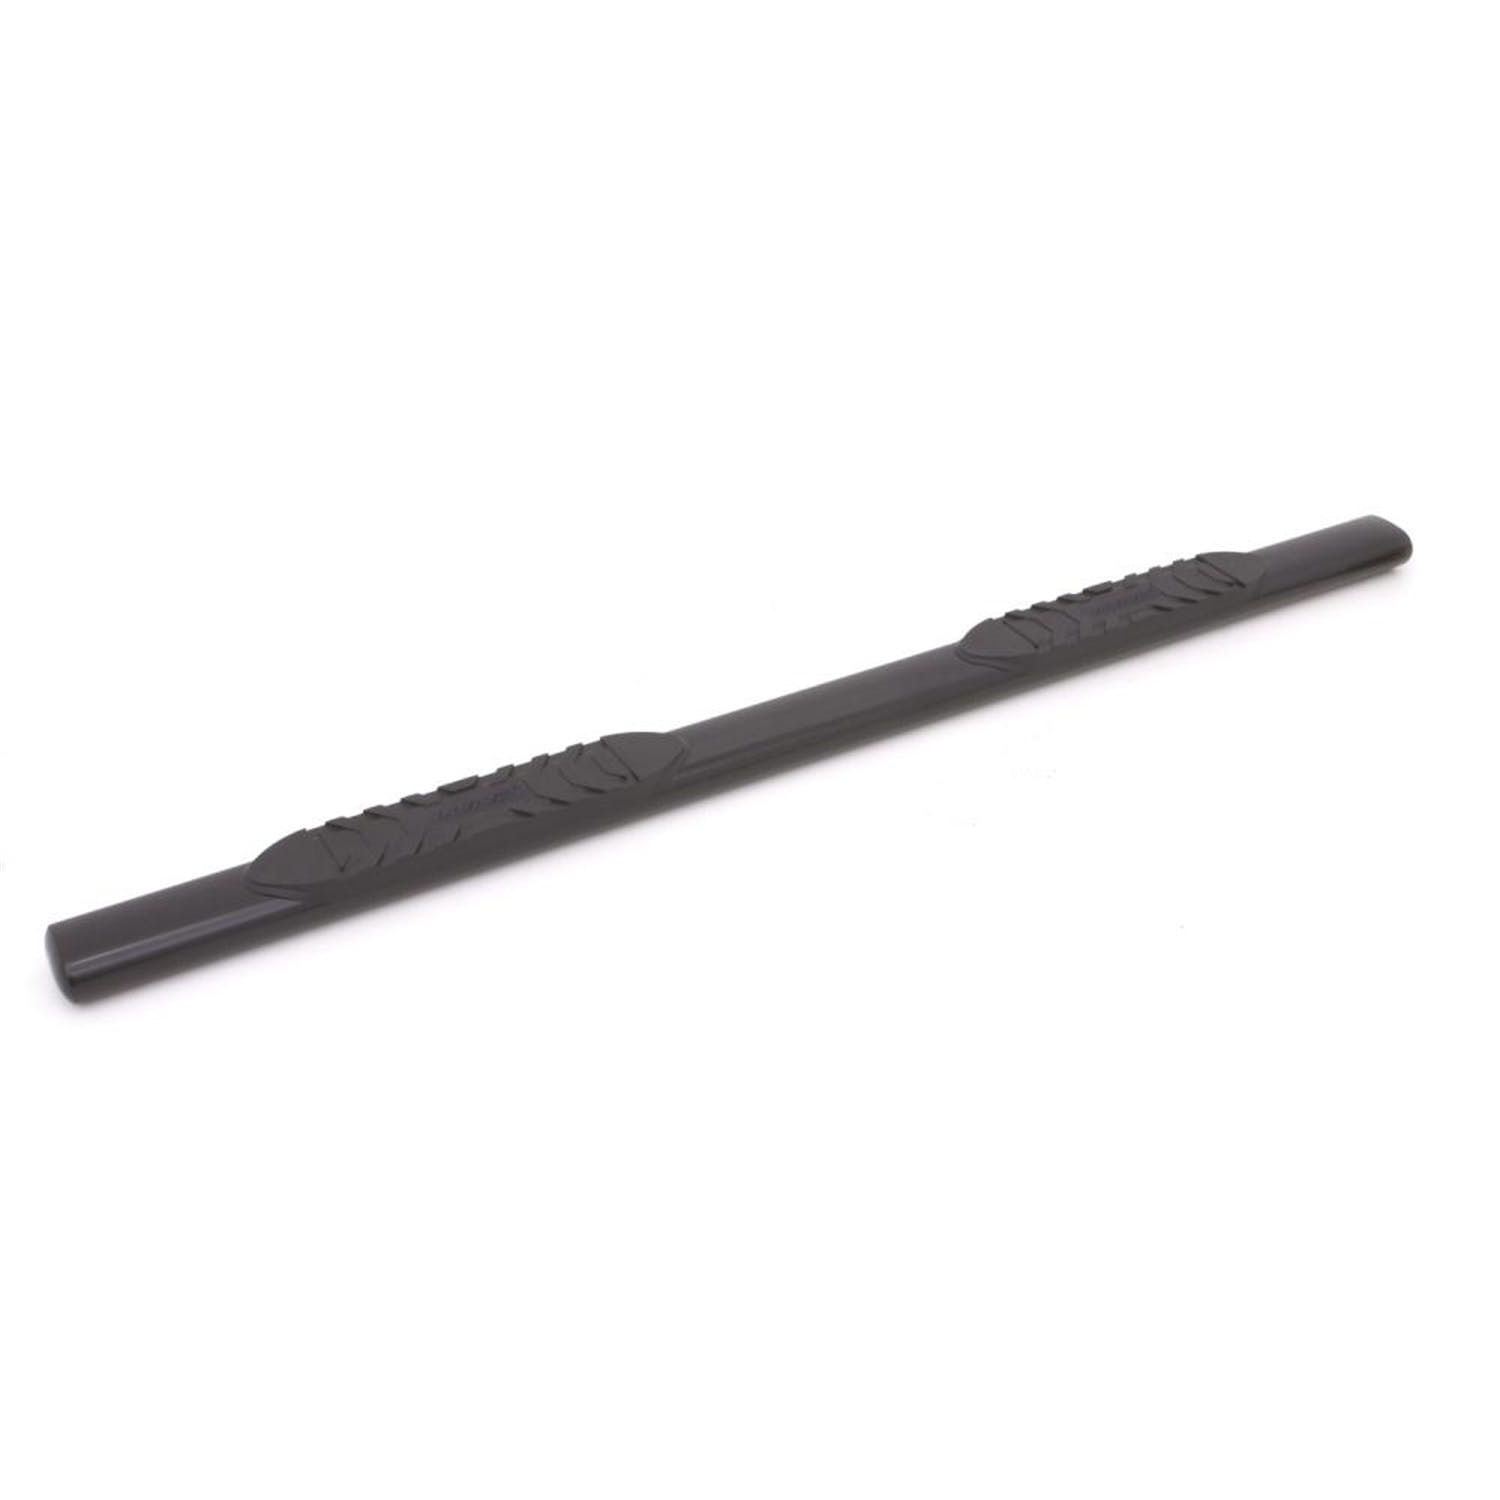 LUND 26610567 6 Inch Oval Straight Nerf Bar - Black 6 In OVAL STRAIGHT BLACK